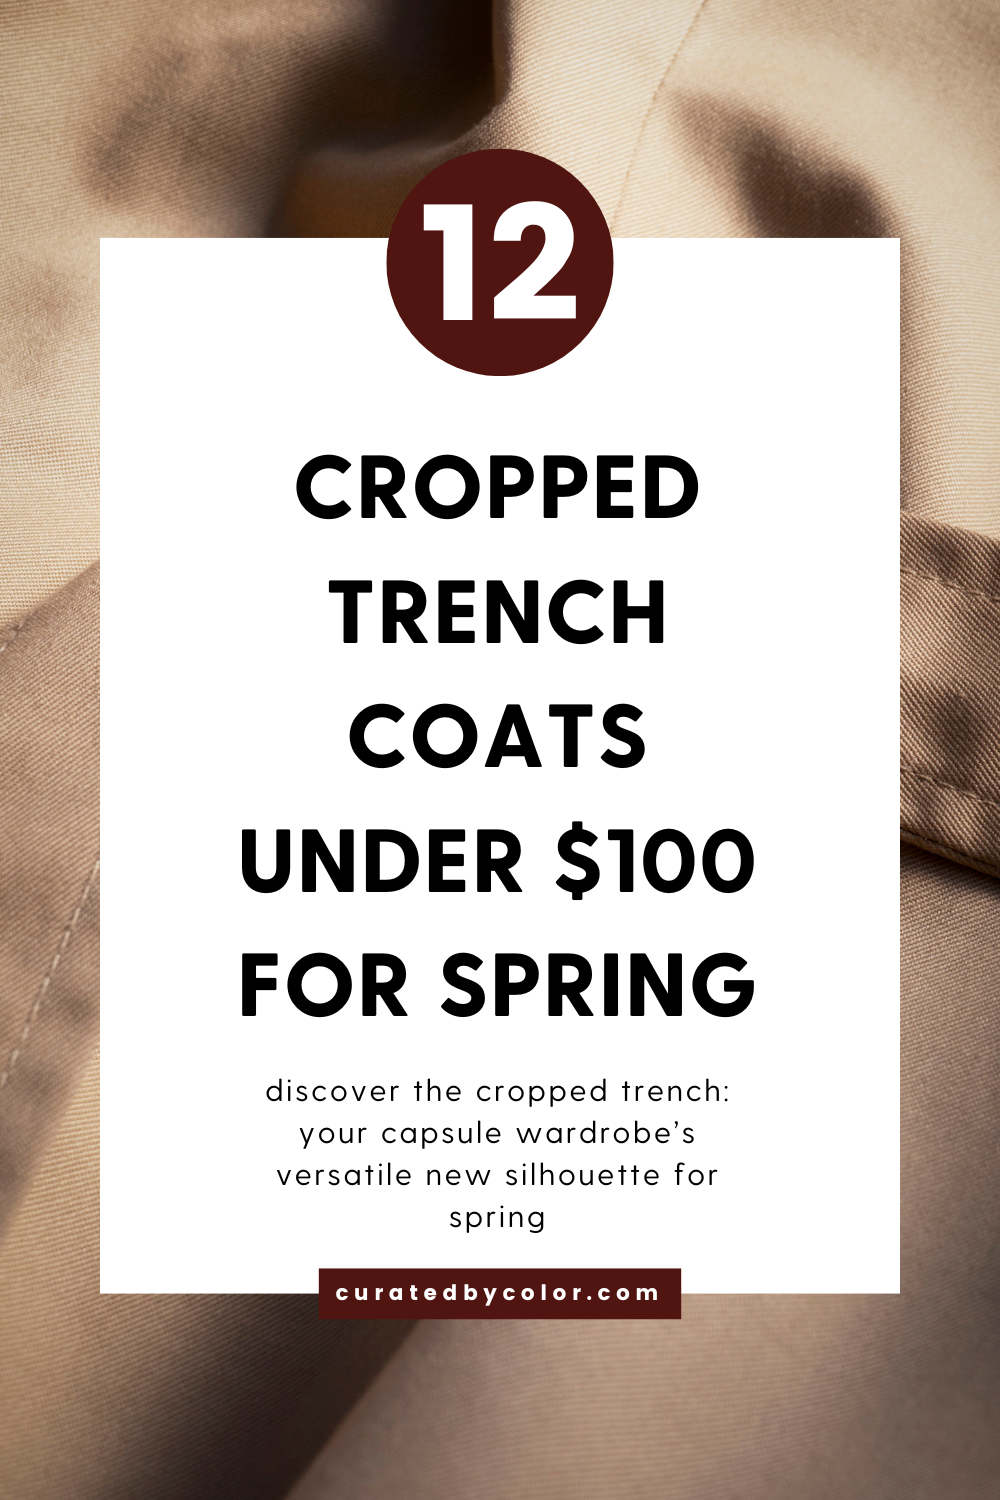 12 Cropped Trench Coats Under $100 For Spring